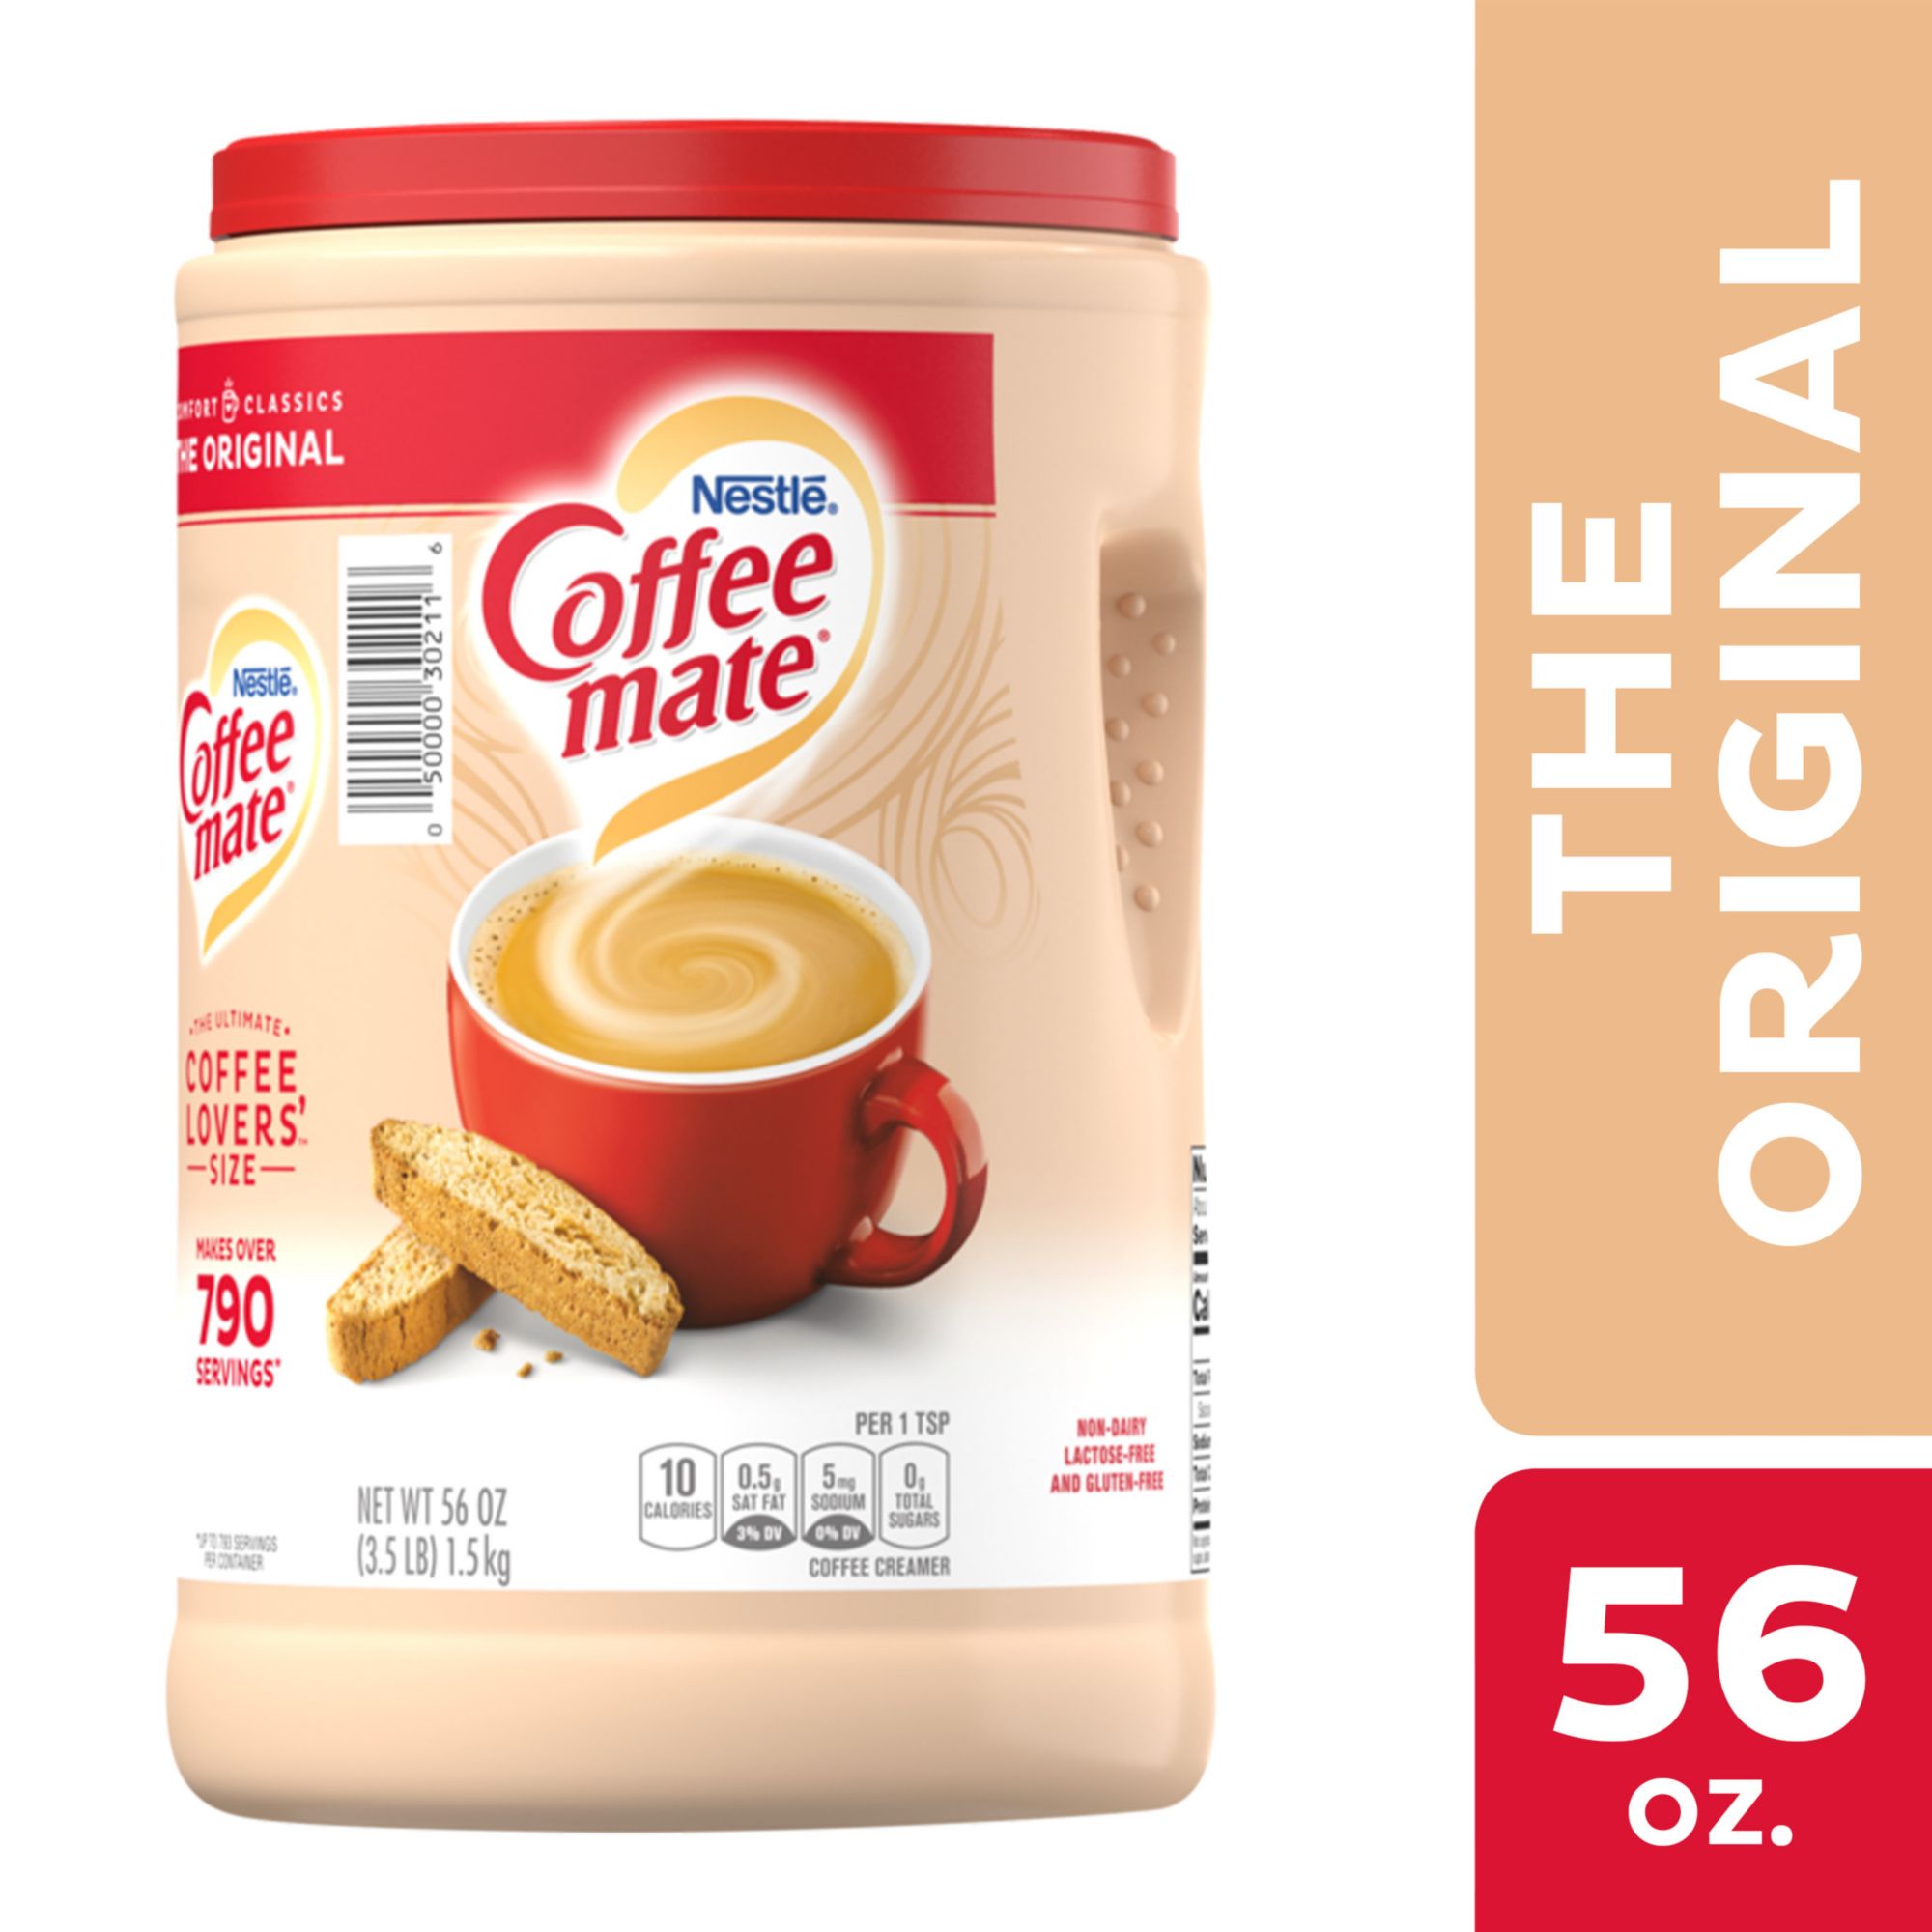 Coffee mate The Original Powder Creamer, 11 oz (Pack of 4) with By The Cup  Scoop